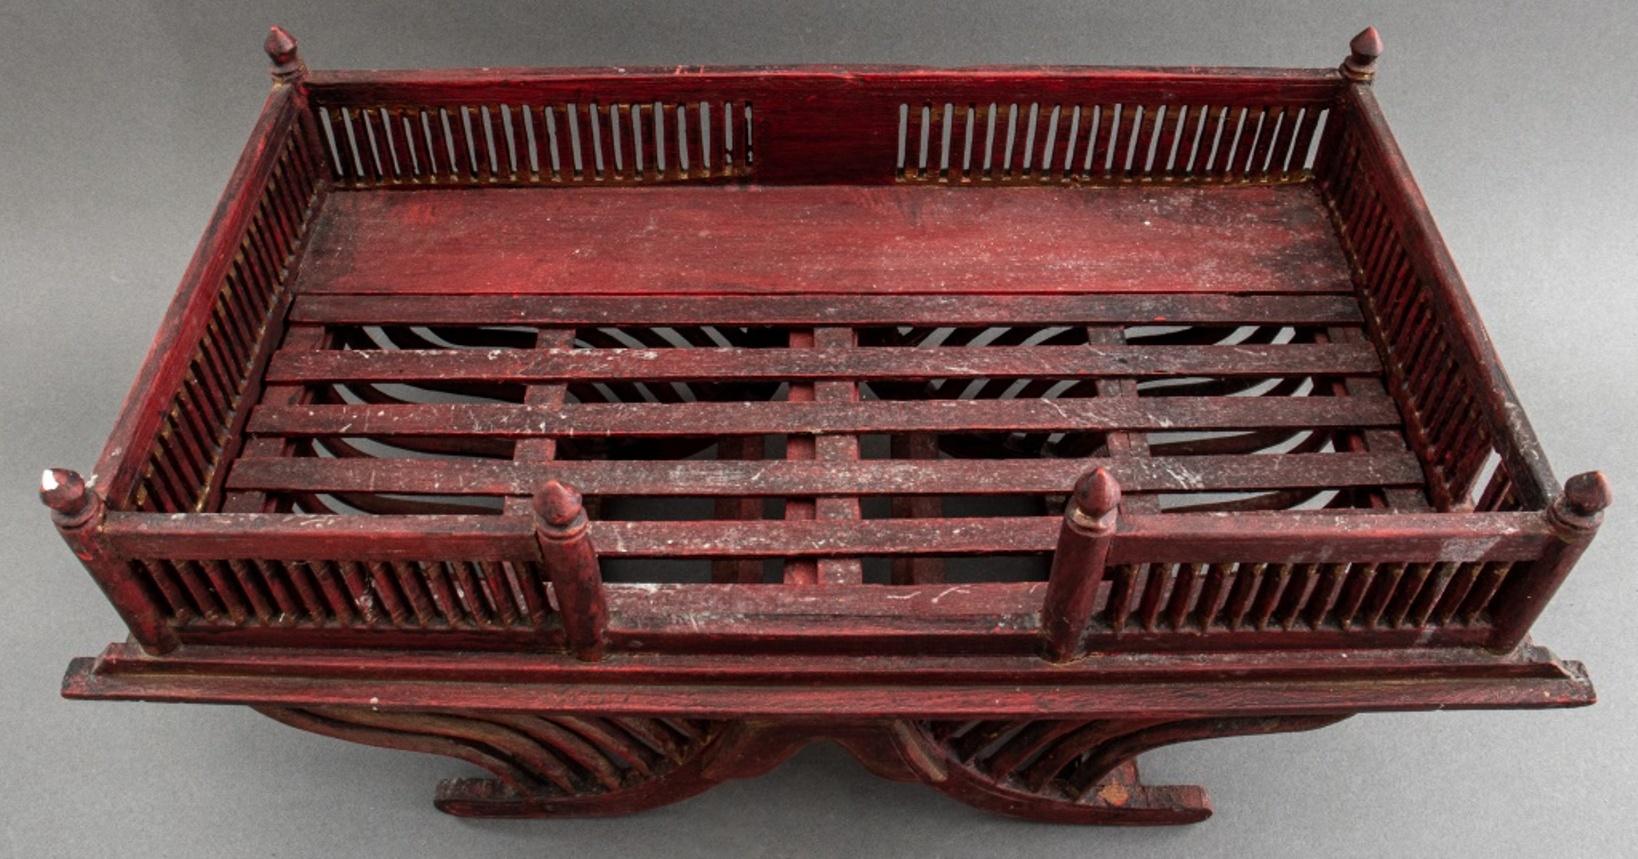 Raj, likely first quarter 20th century, of typical form with rectangular slatted palanquin and elephant saddle, likley 19th C or later, possibly stained Sandalwood. 

Dimensions:  9.5